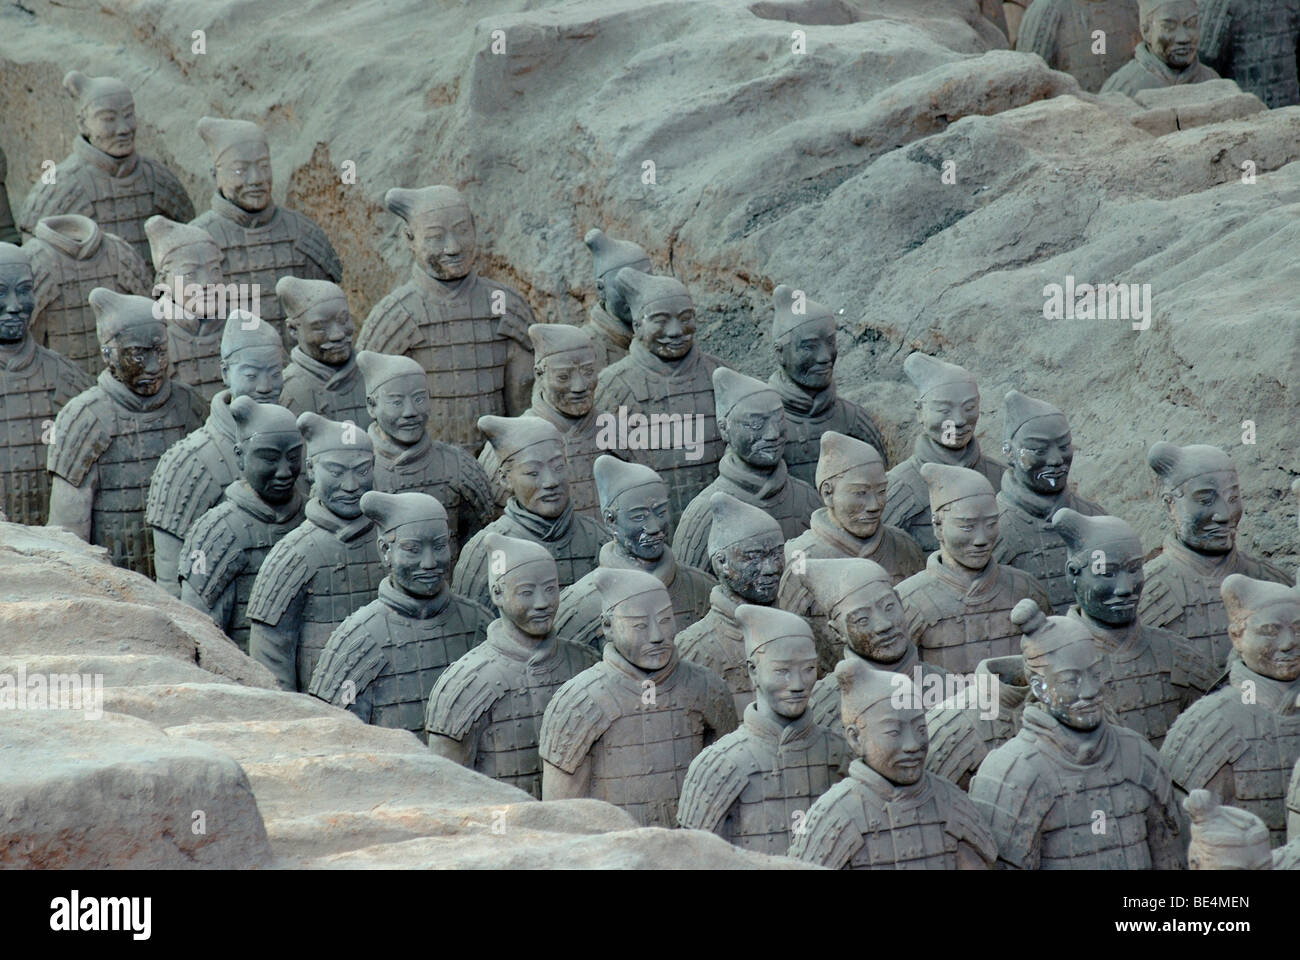 Terracotta army, part of the grave complex, hall 1, mausoleum of the 1st Emperor Qin Shi Huang in Xi'an, Shaanxi Province, Chin Stock Photo